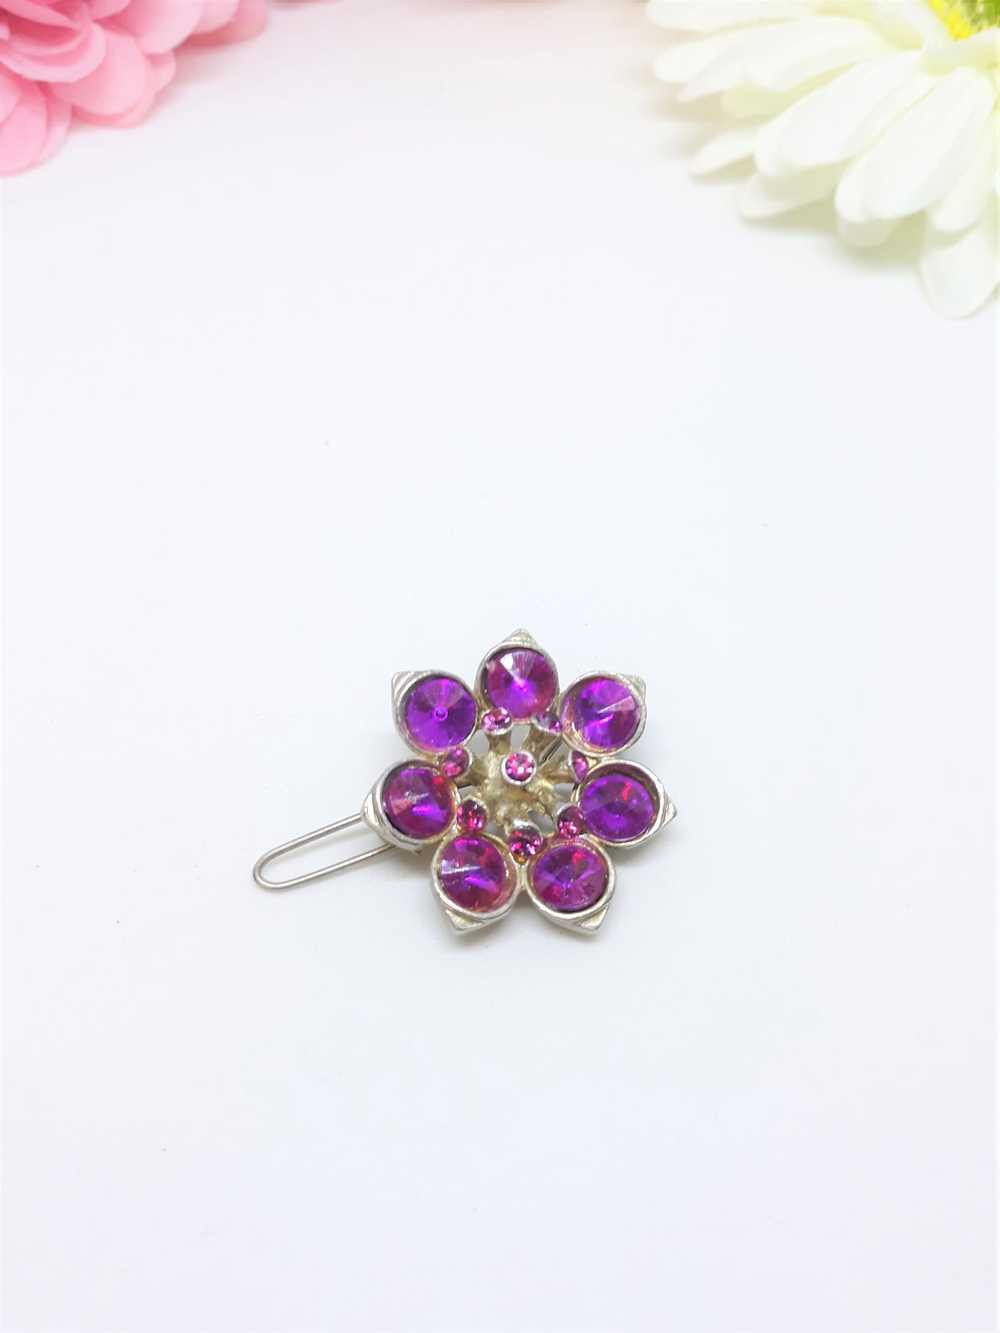 Gorgeous 1950s Purple Floral Hair Pin - image 5